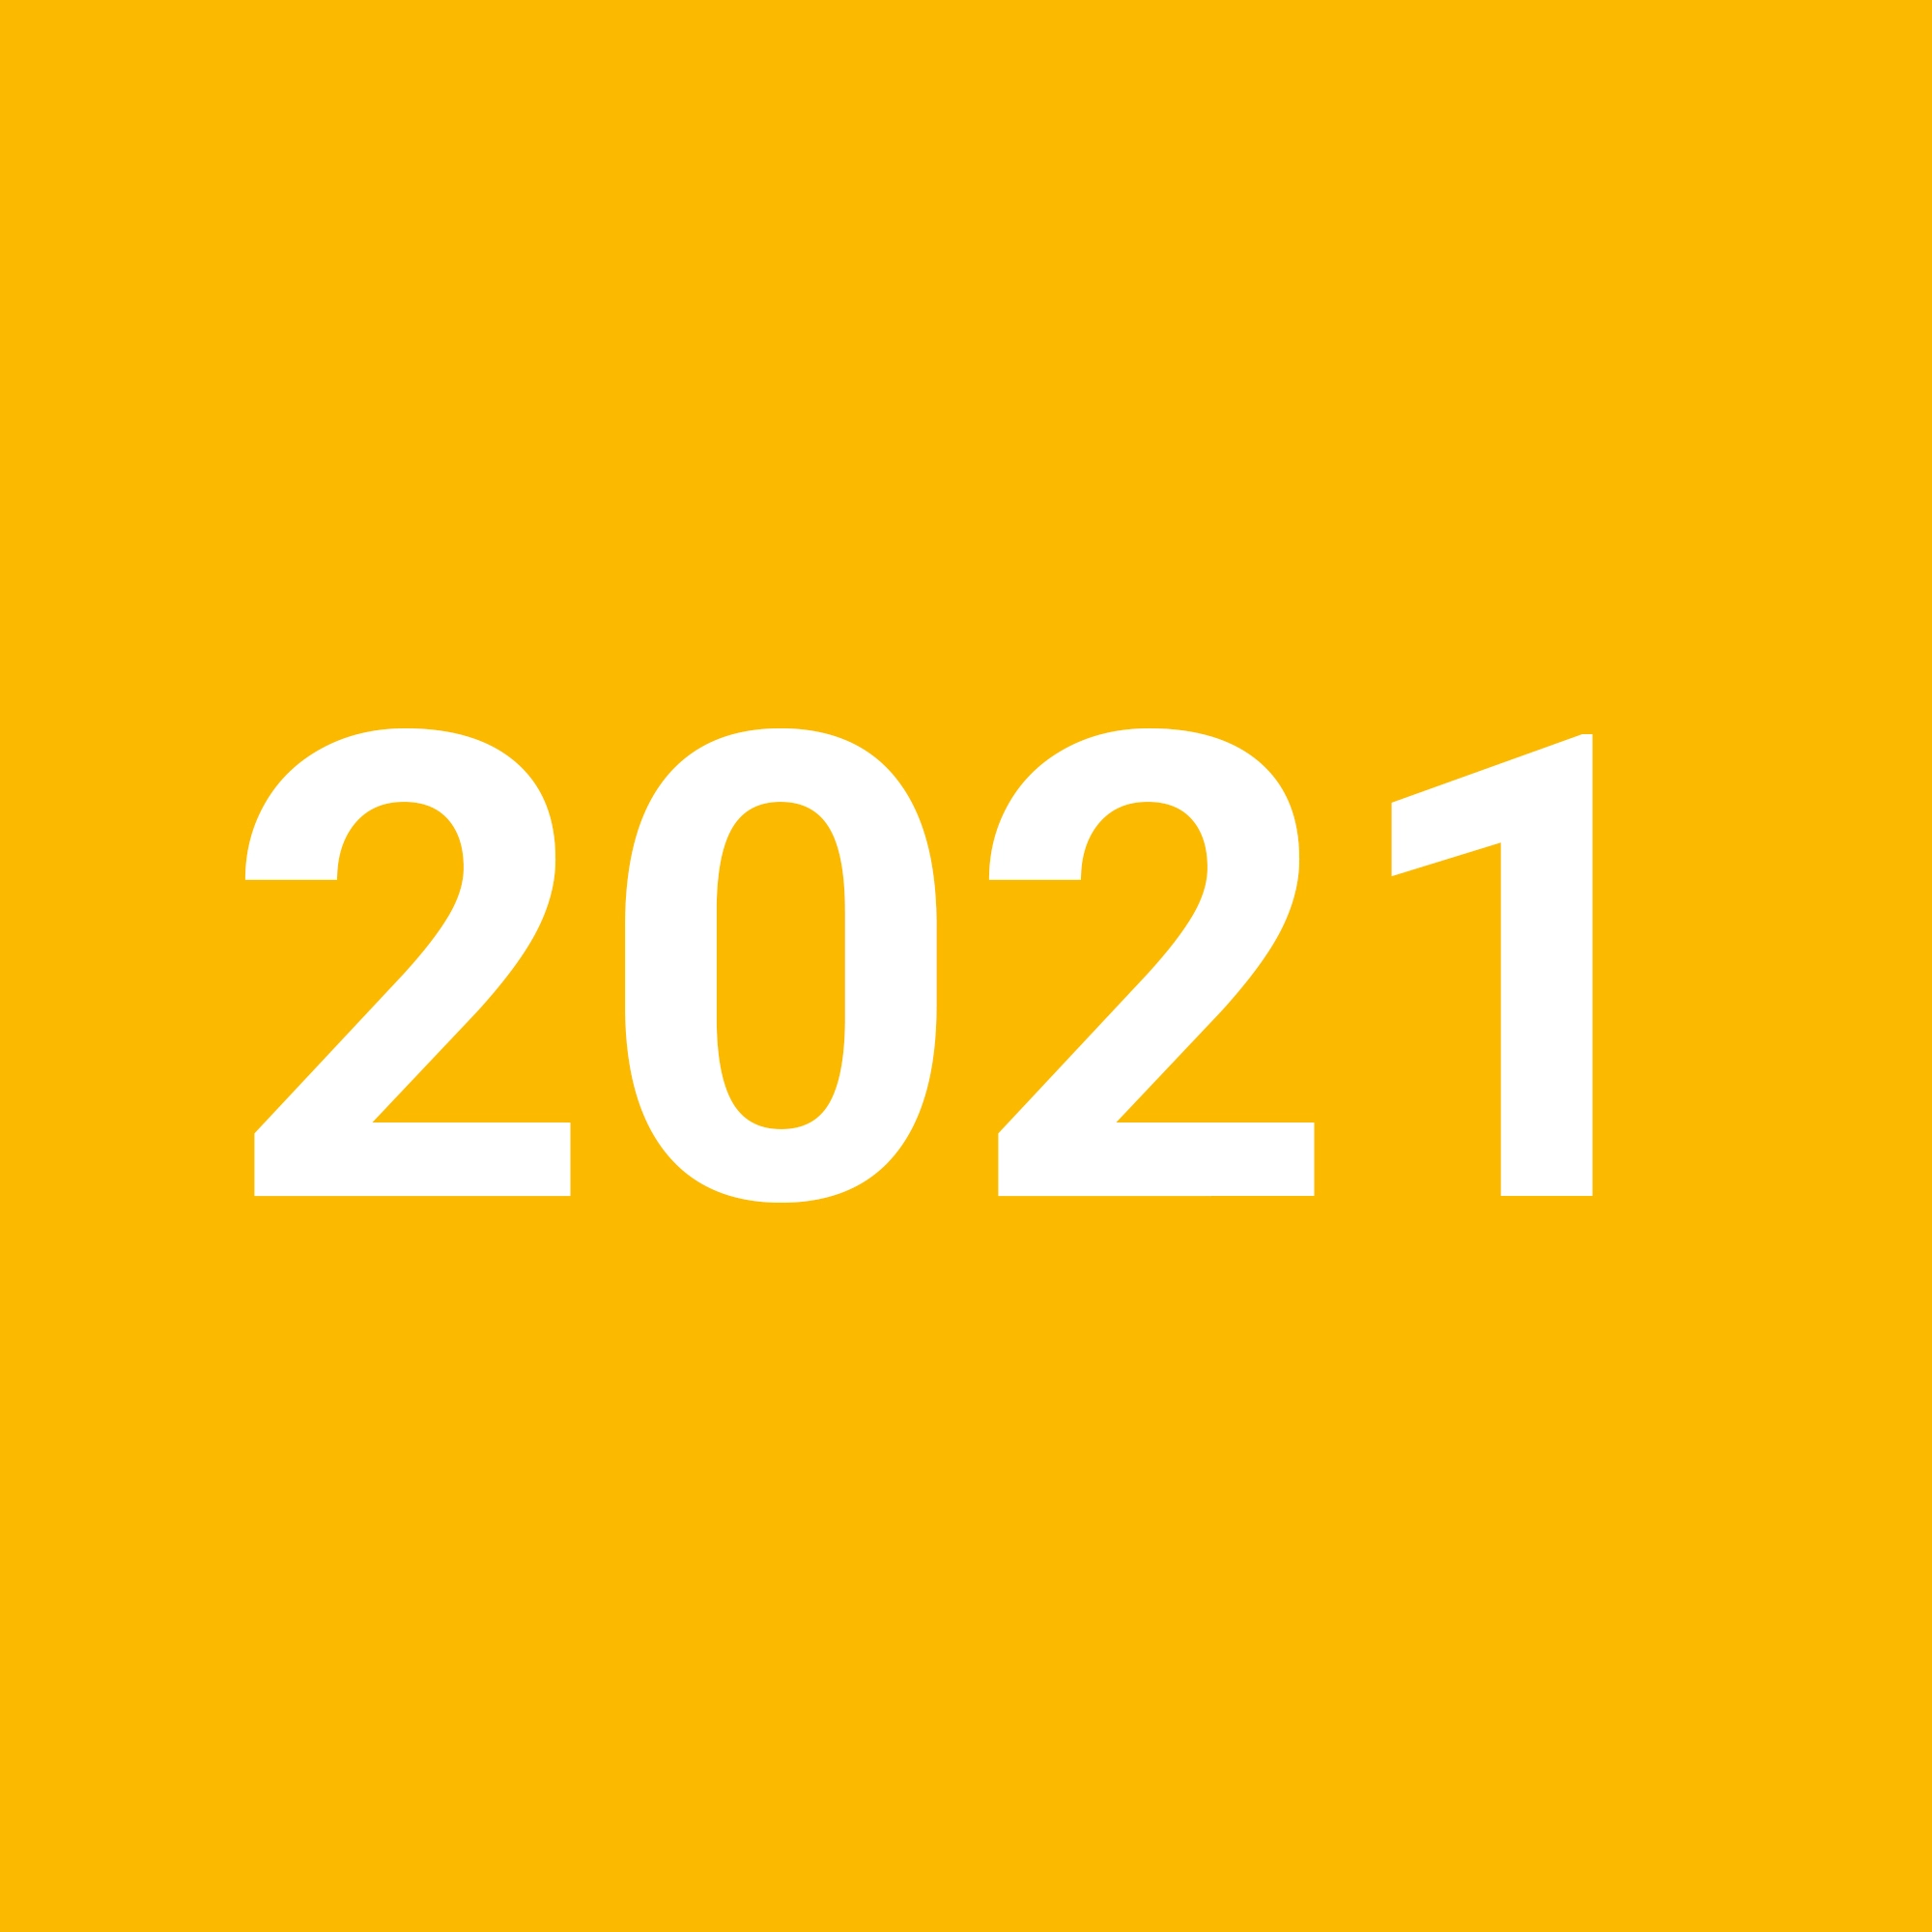 2021 on a yellow background